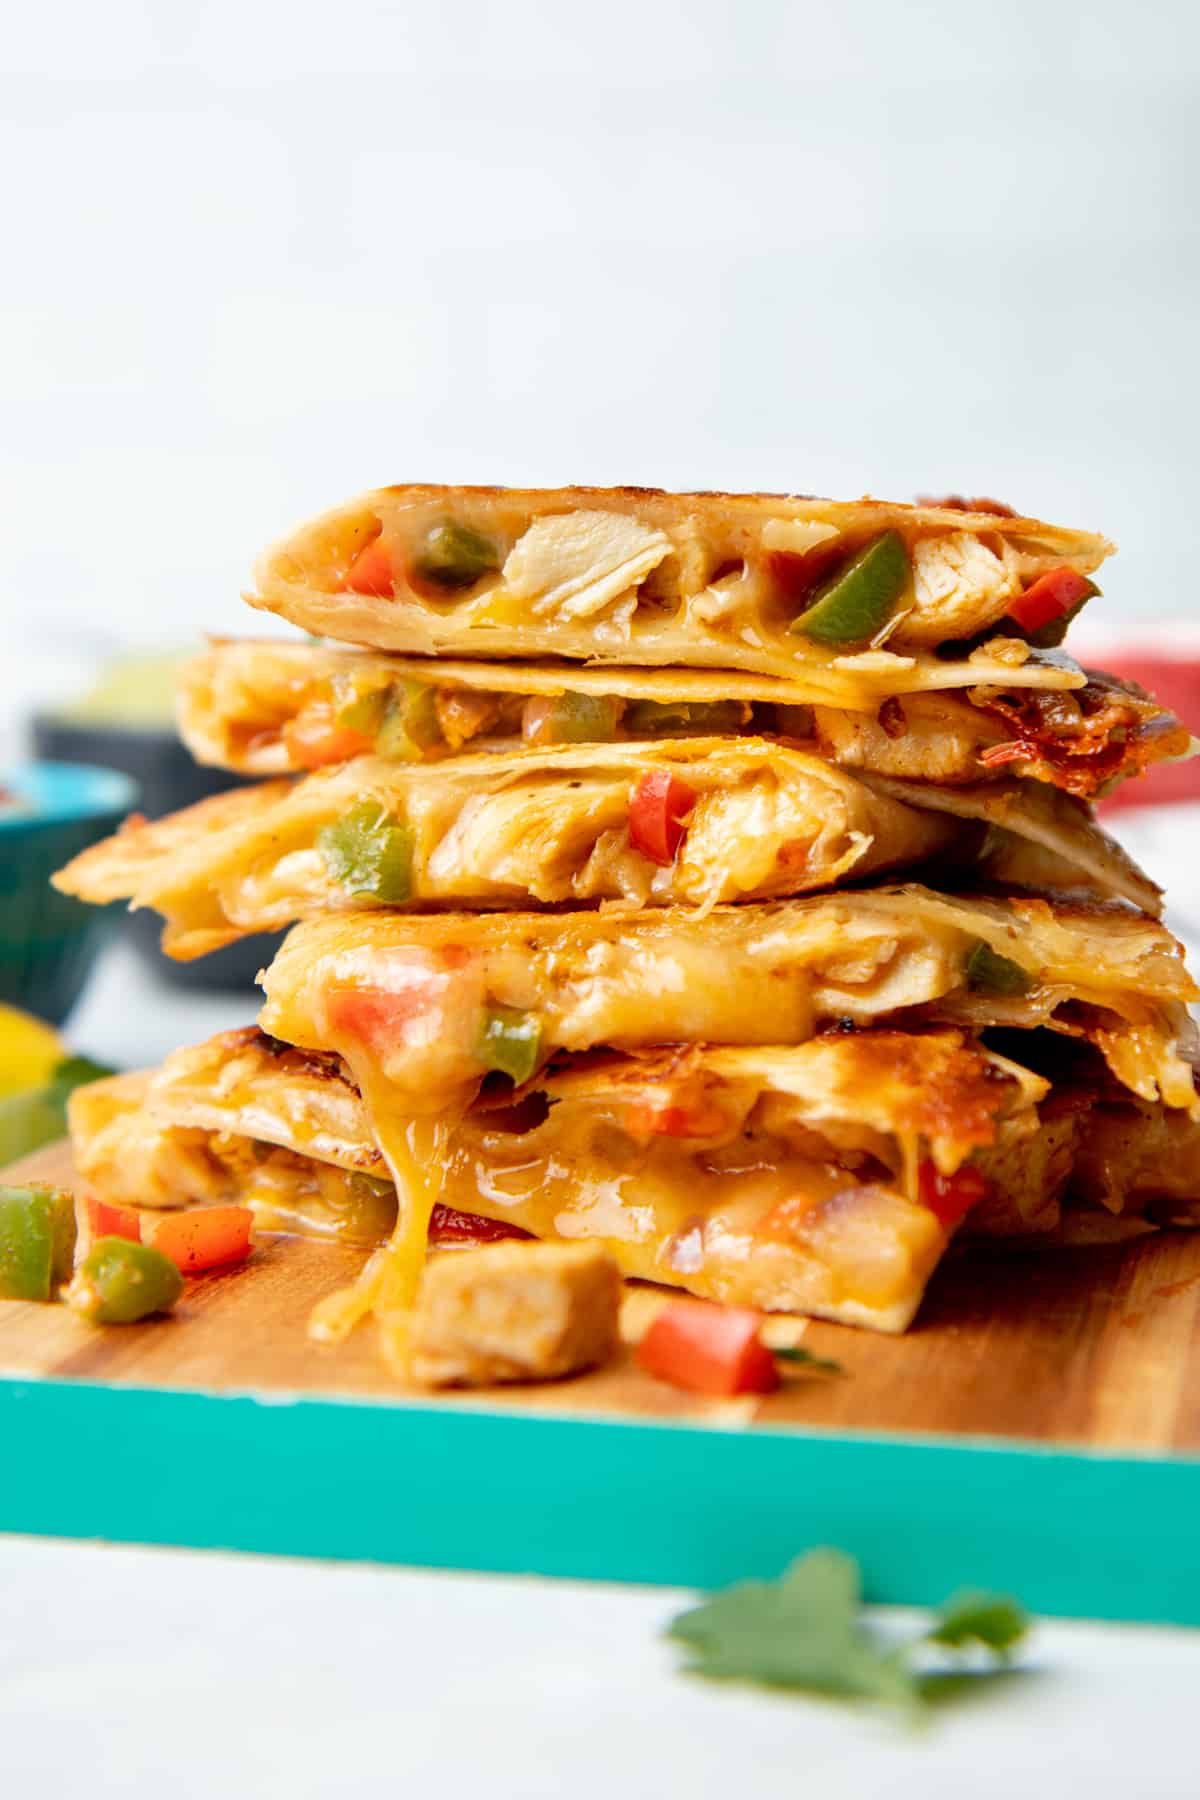 How to Make Easy Chicken Quesadillas